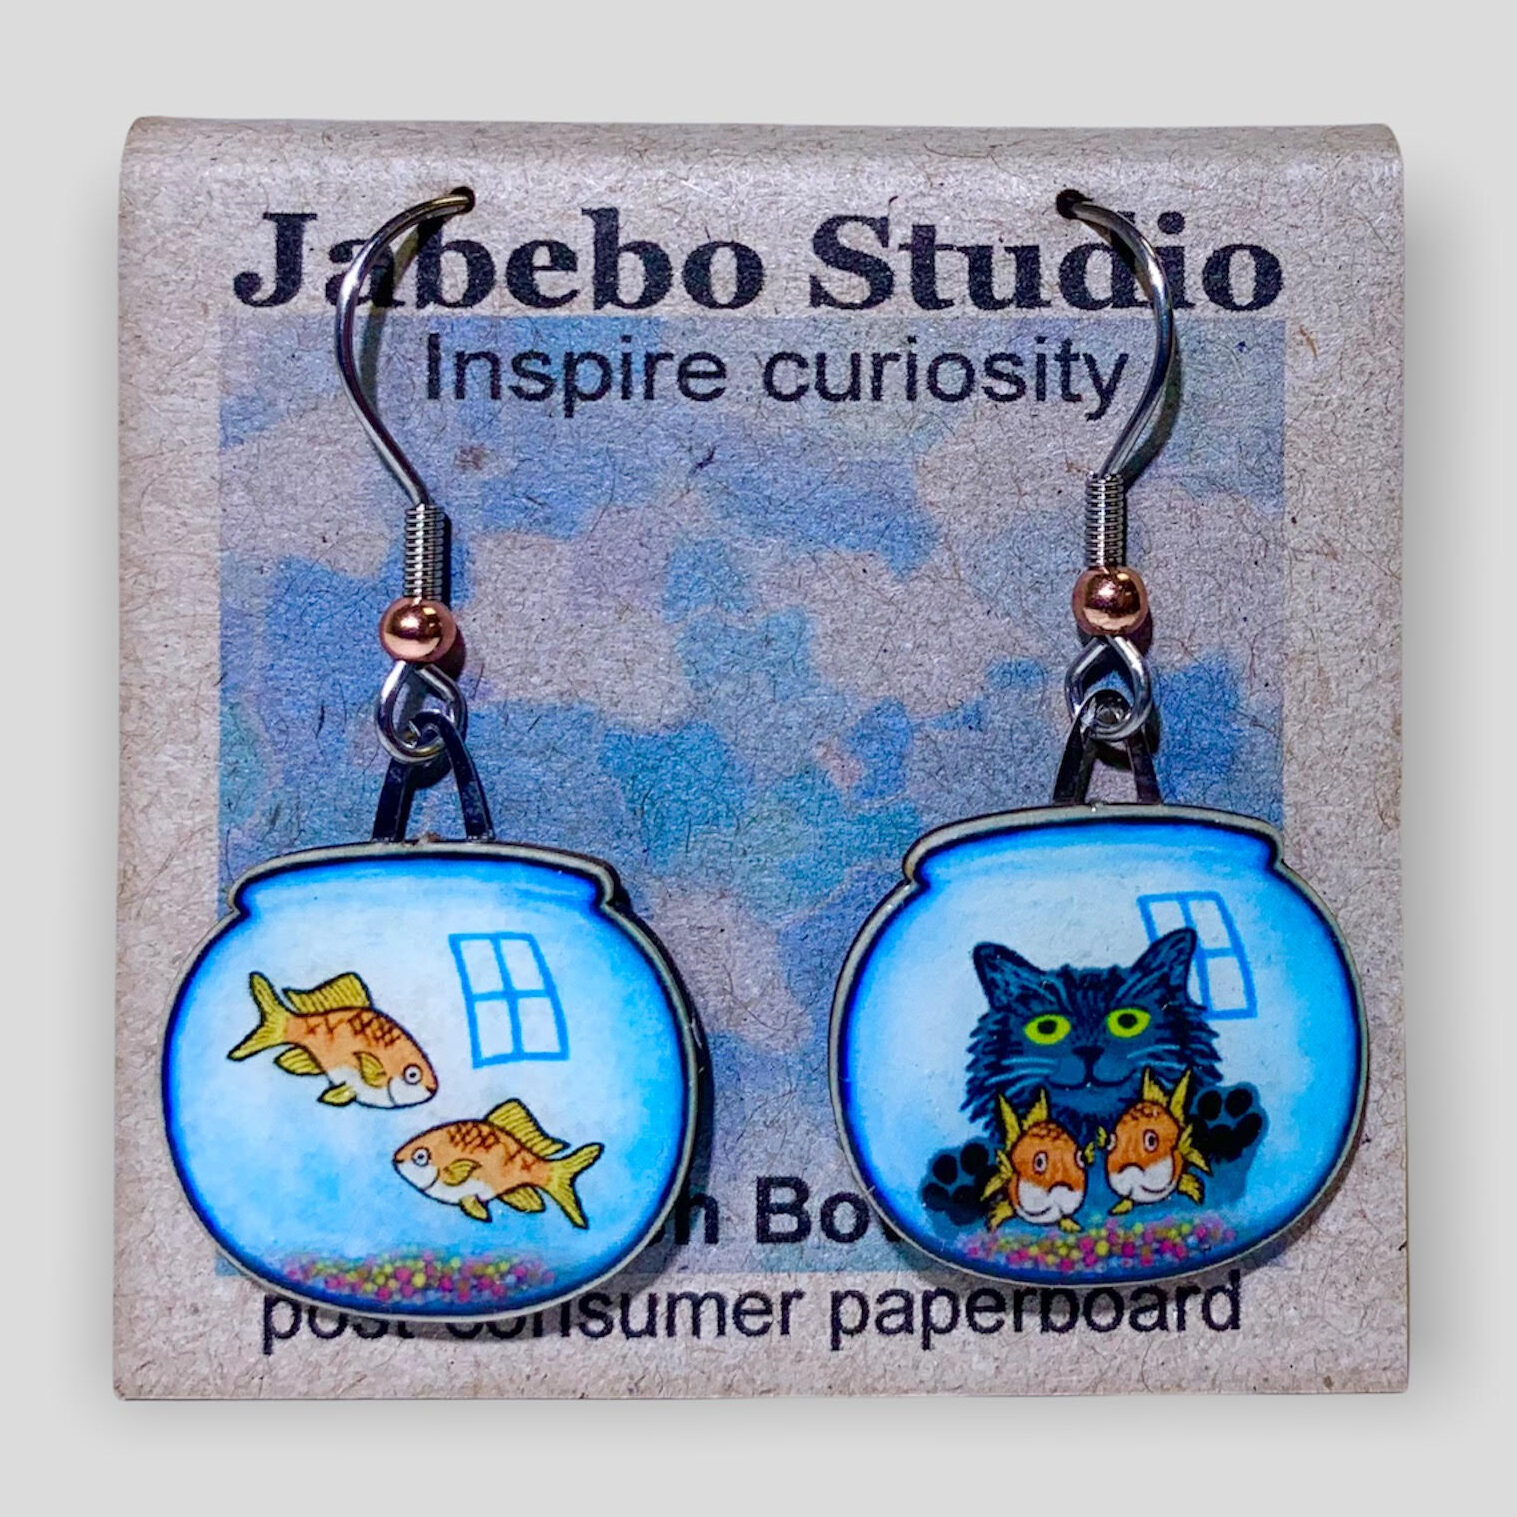 Picture shown is of 1 inch tall pair of earrings of a Fishbowl and Kitty.